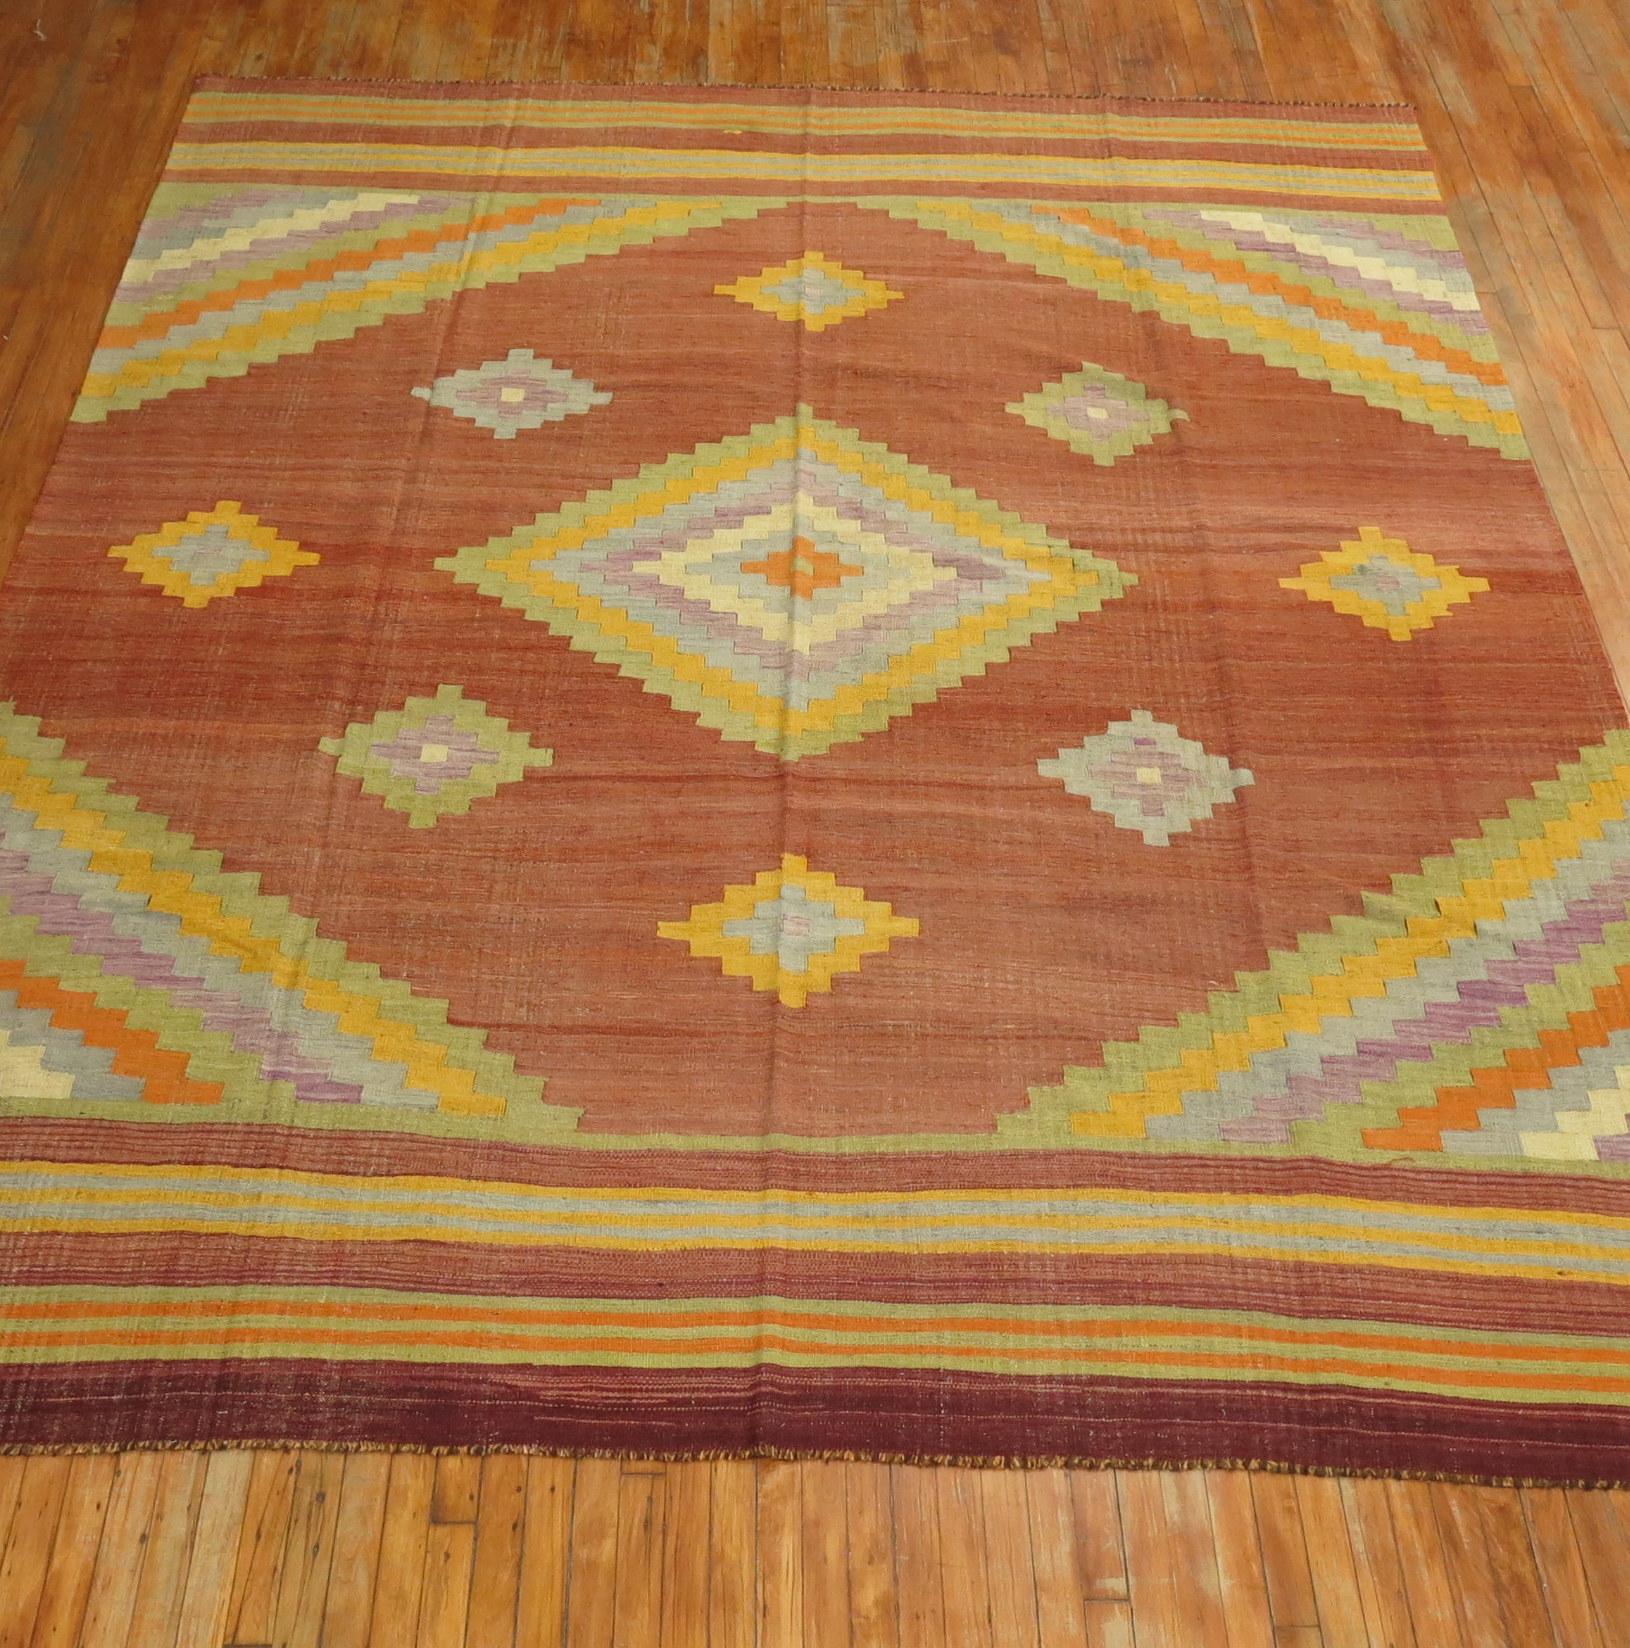 A room size mid-20th century Turkish Kilim flat-weave with pretty accents in lavender, blue-gray, yellow and soft green on a brown rust colored field.

Measures: 9'4